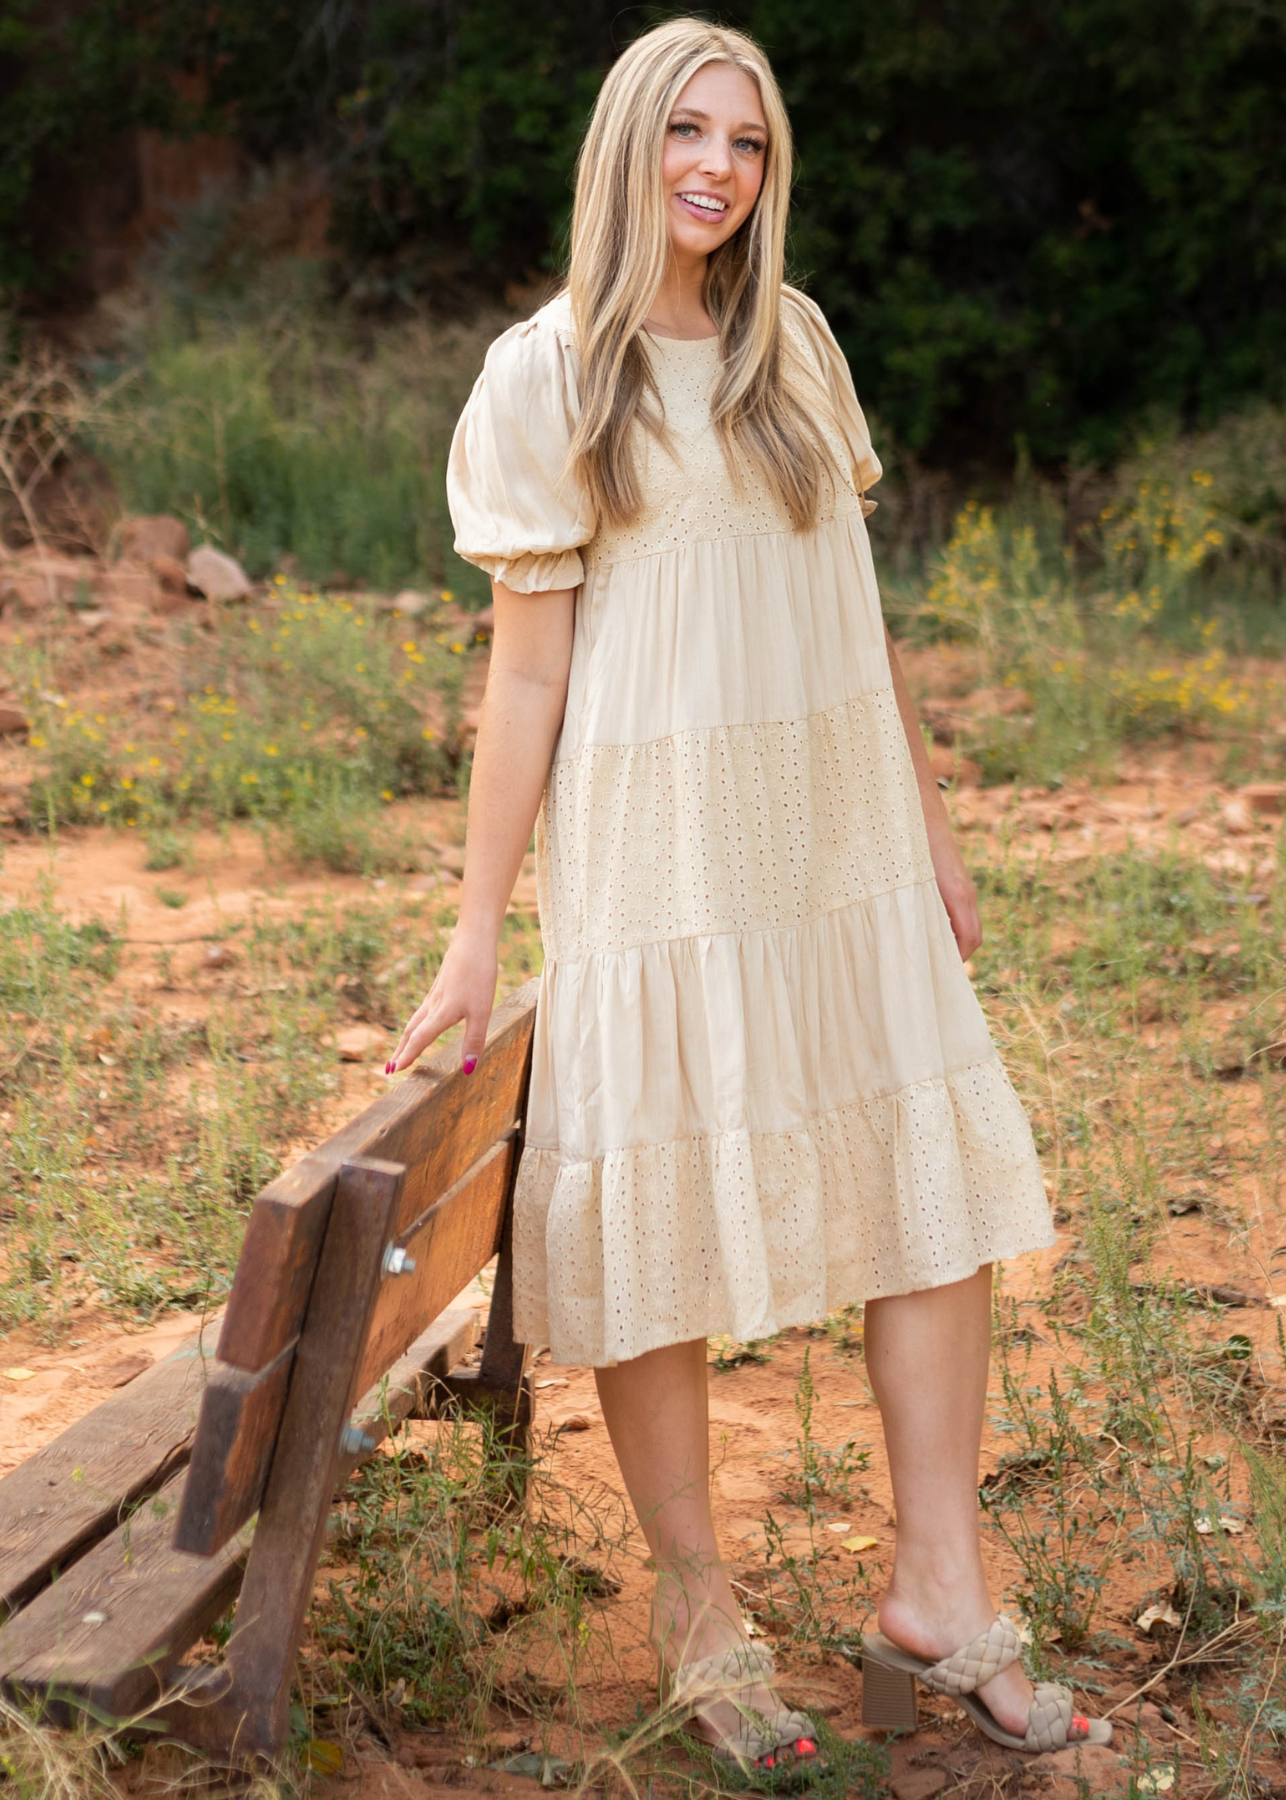 Short sleeve beige dress with tiered design and eyelet fabric panels